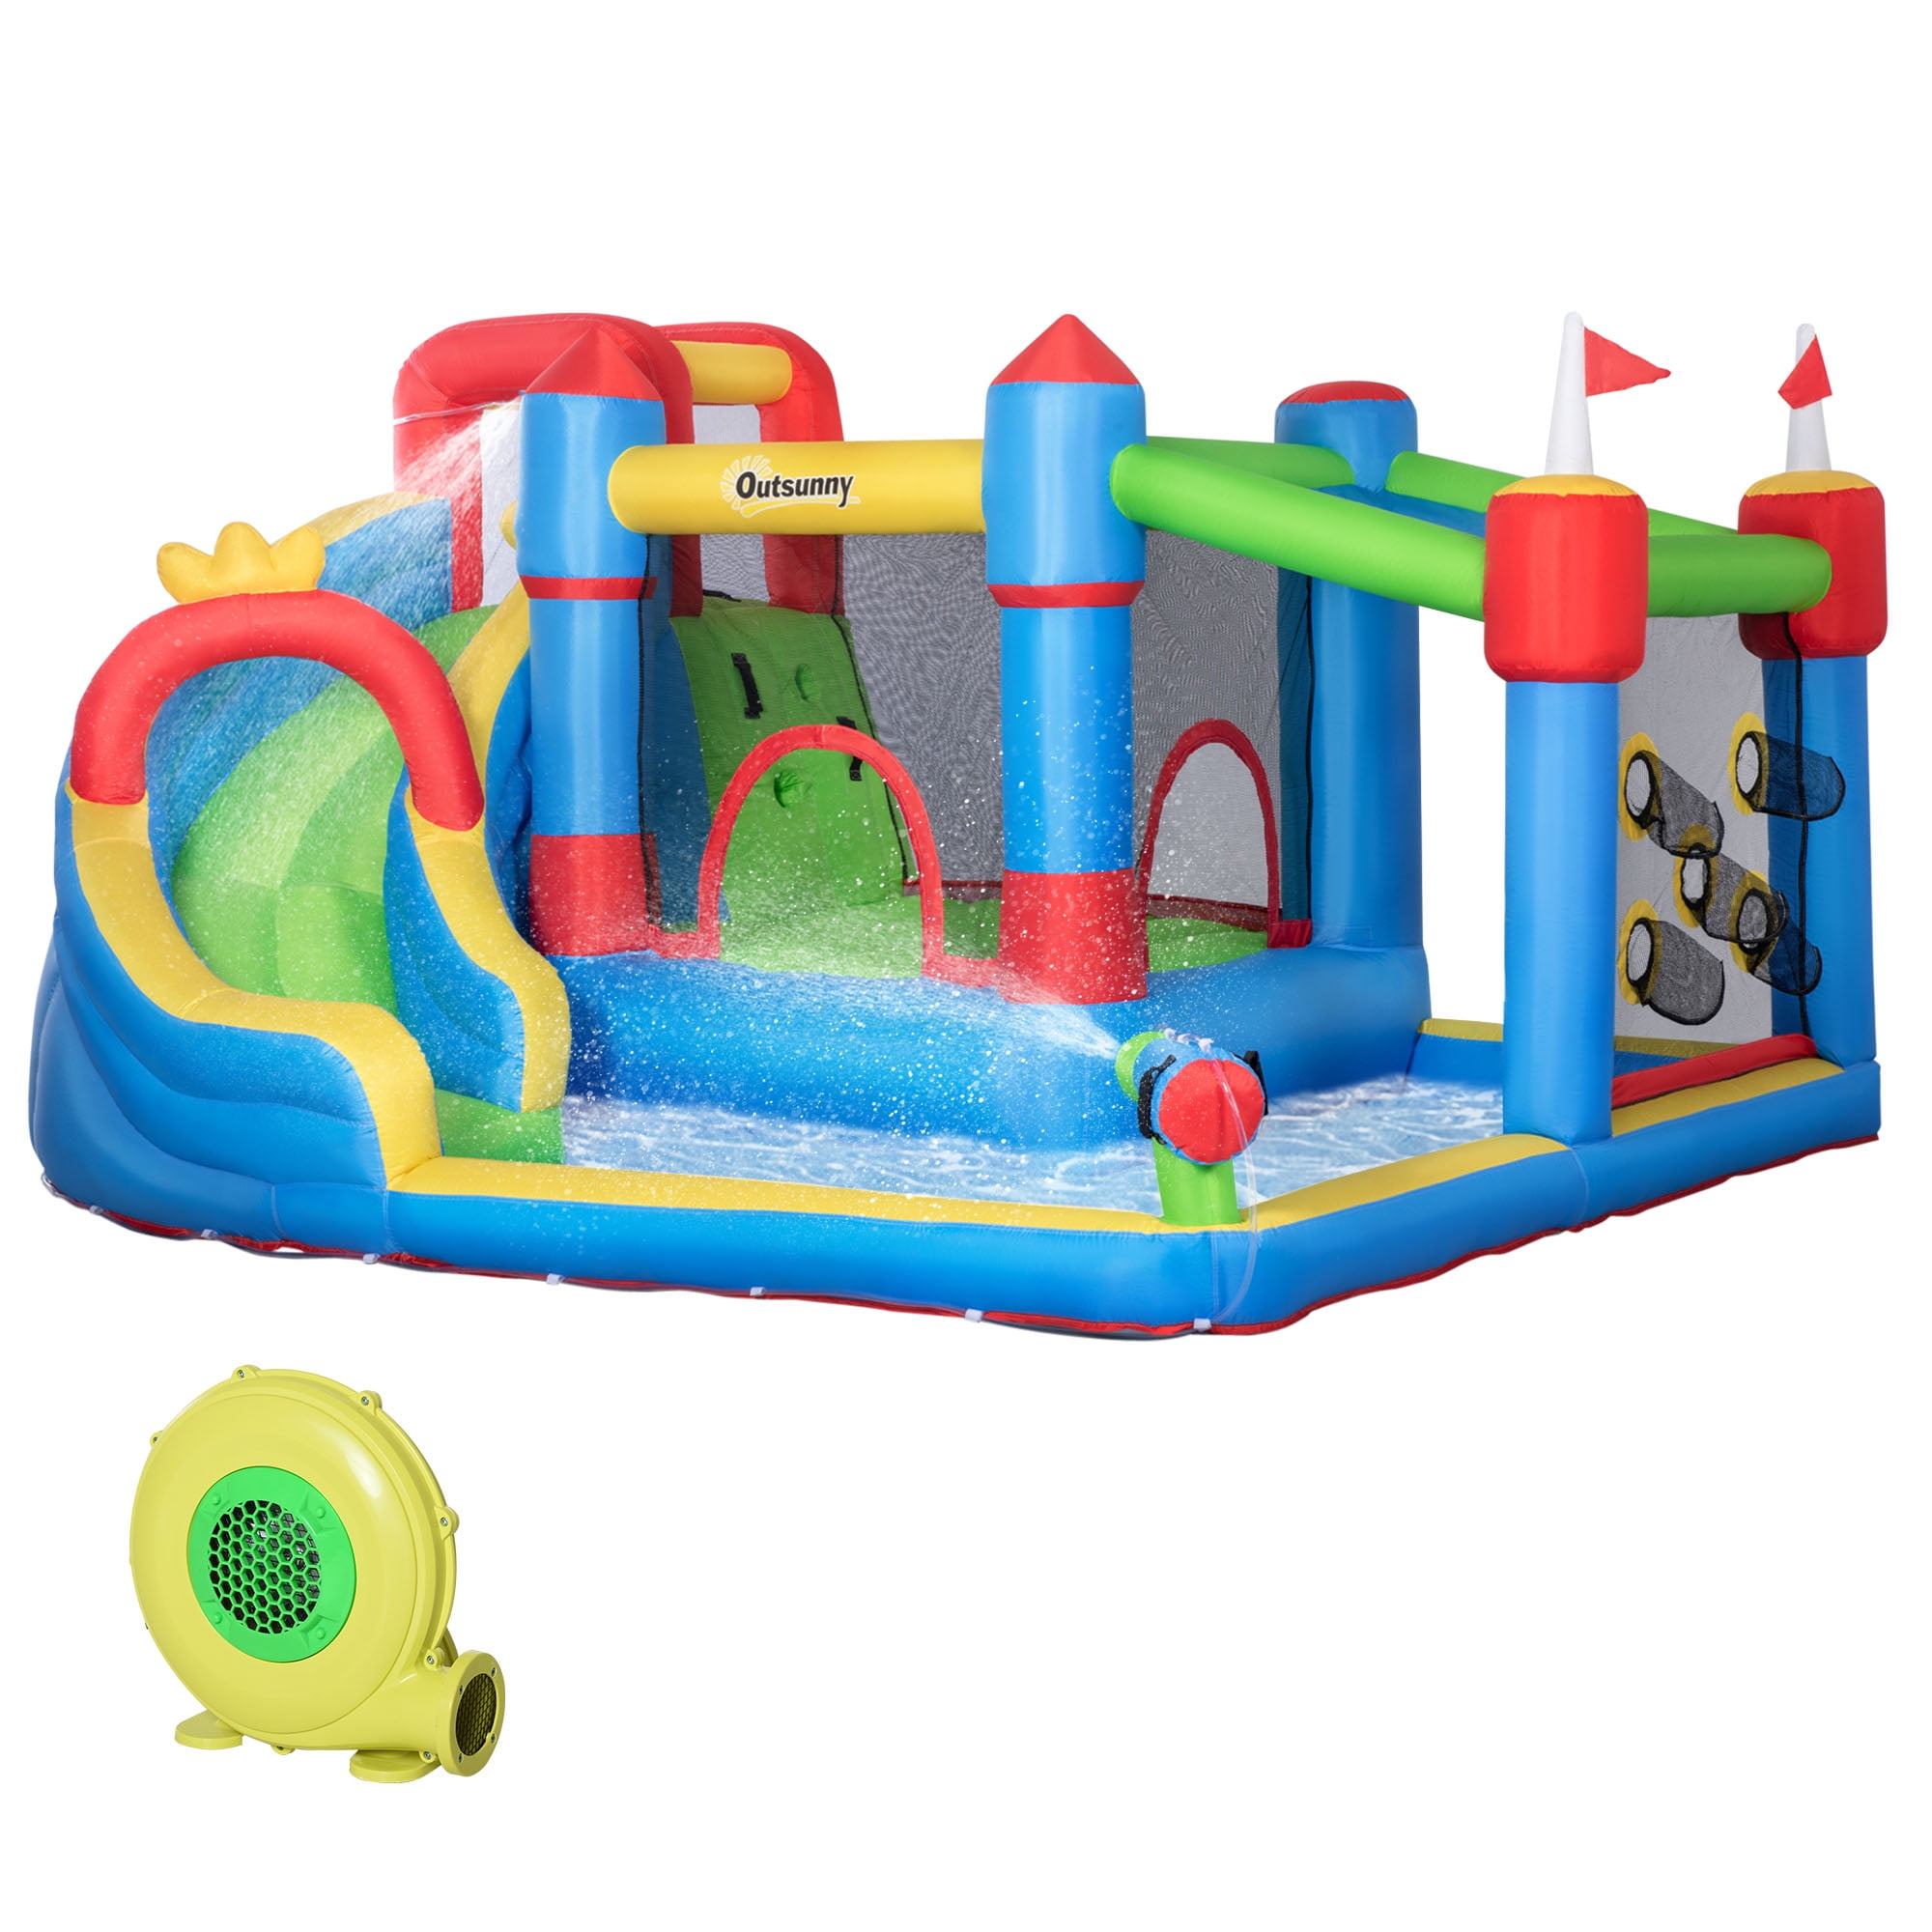 Premium 6 in 1 Inflatable Bounce House Castle for Kids including Air Blower 